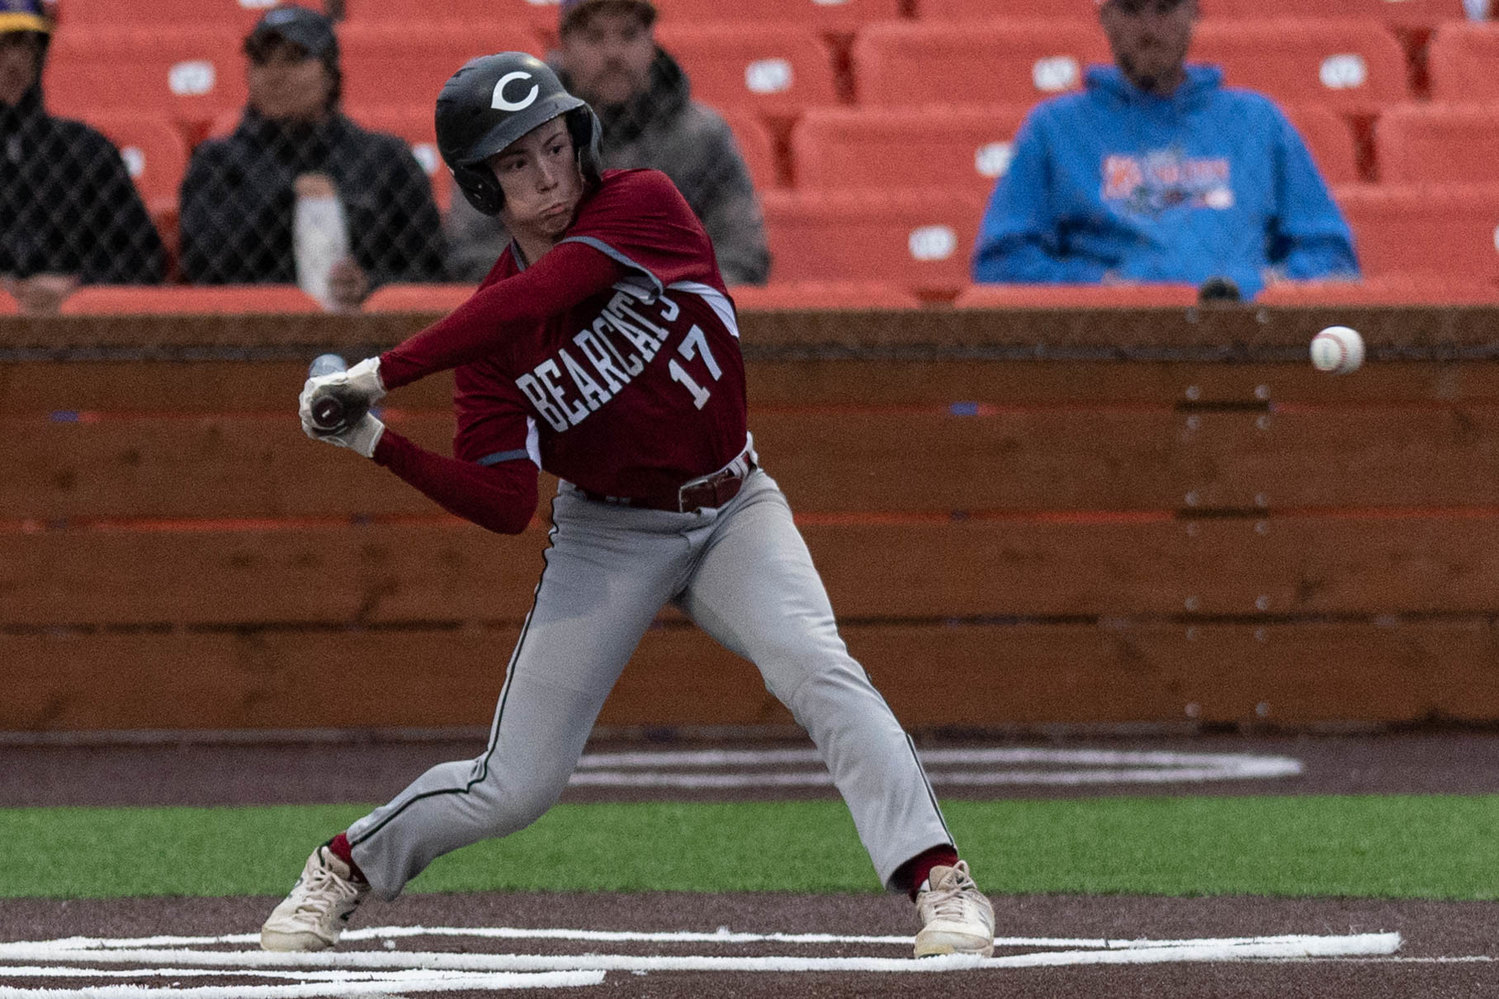 W.F. West's Ross Kelley swings at a pitch against Columbia River in the 2A District 4 semifinals May 11 at Ridgefield.